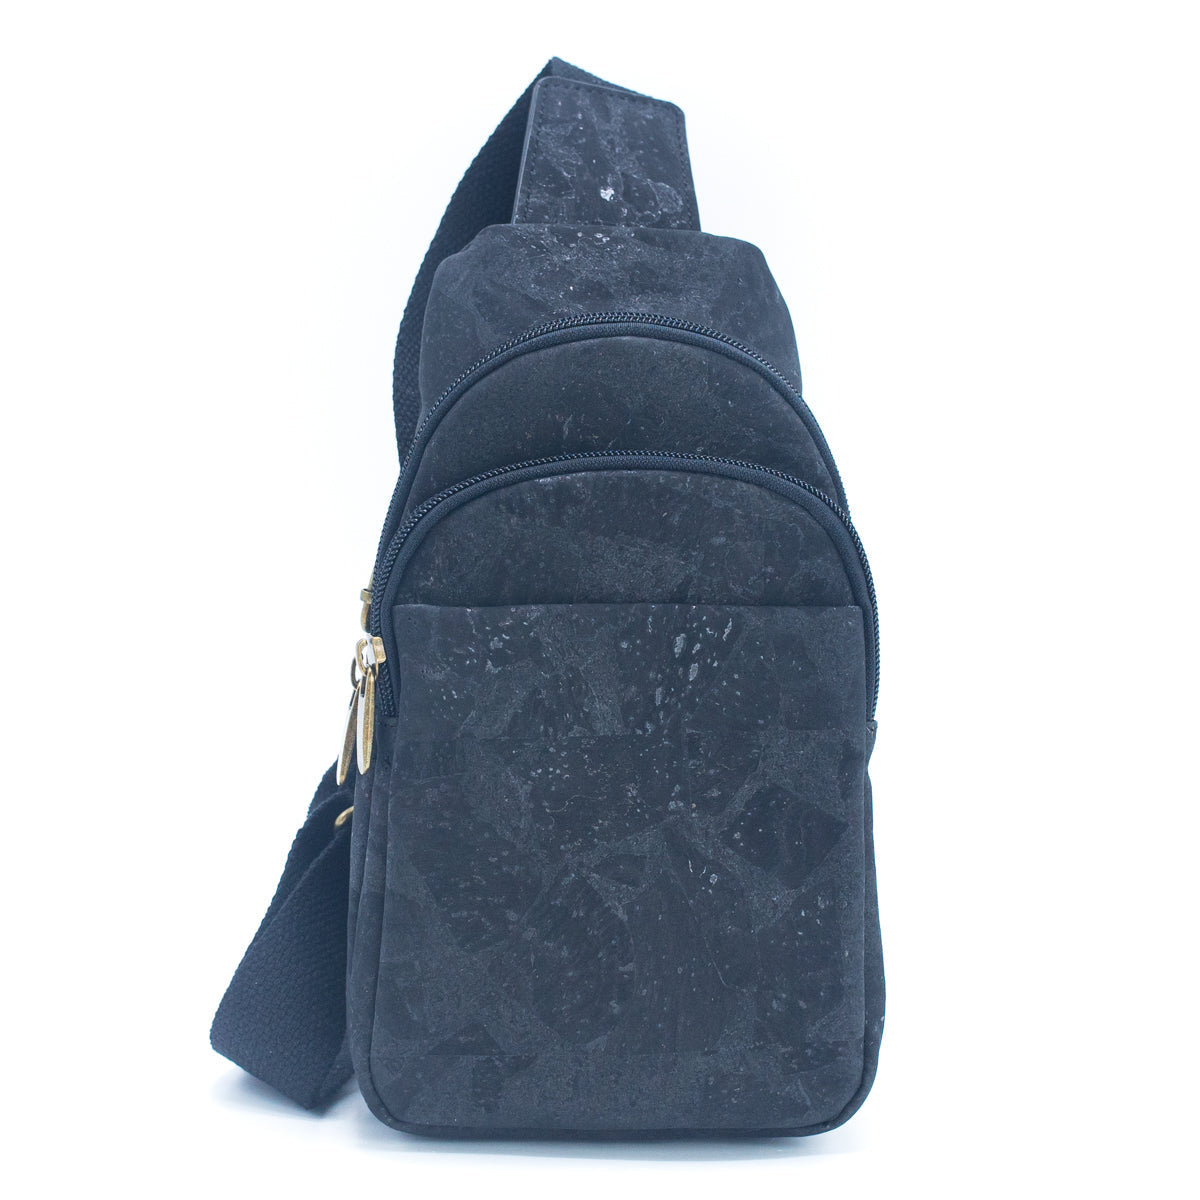 Brown & Black Natural Cork Men's Chest Pack | THE CORK COLLECTION